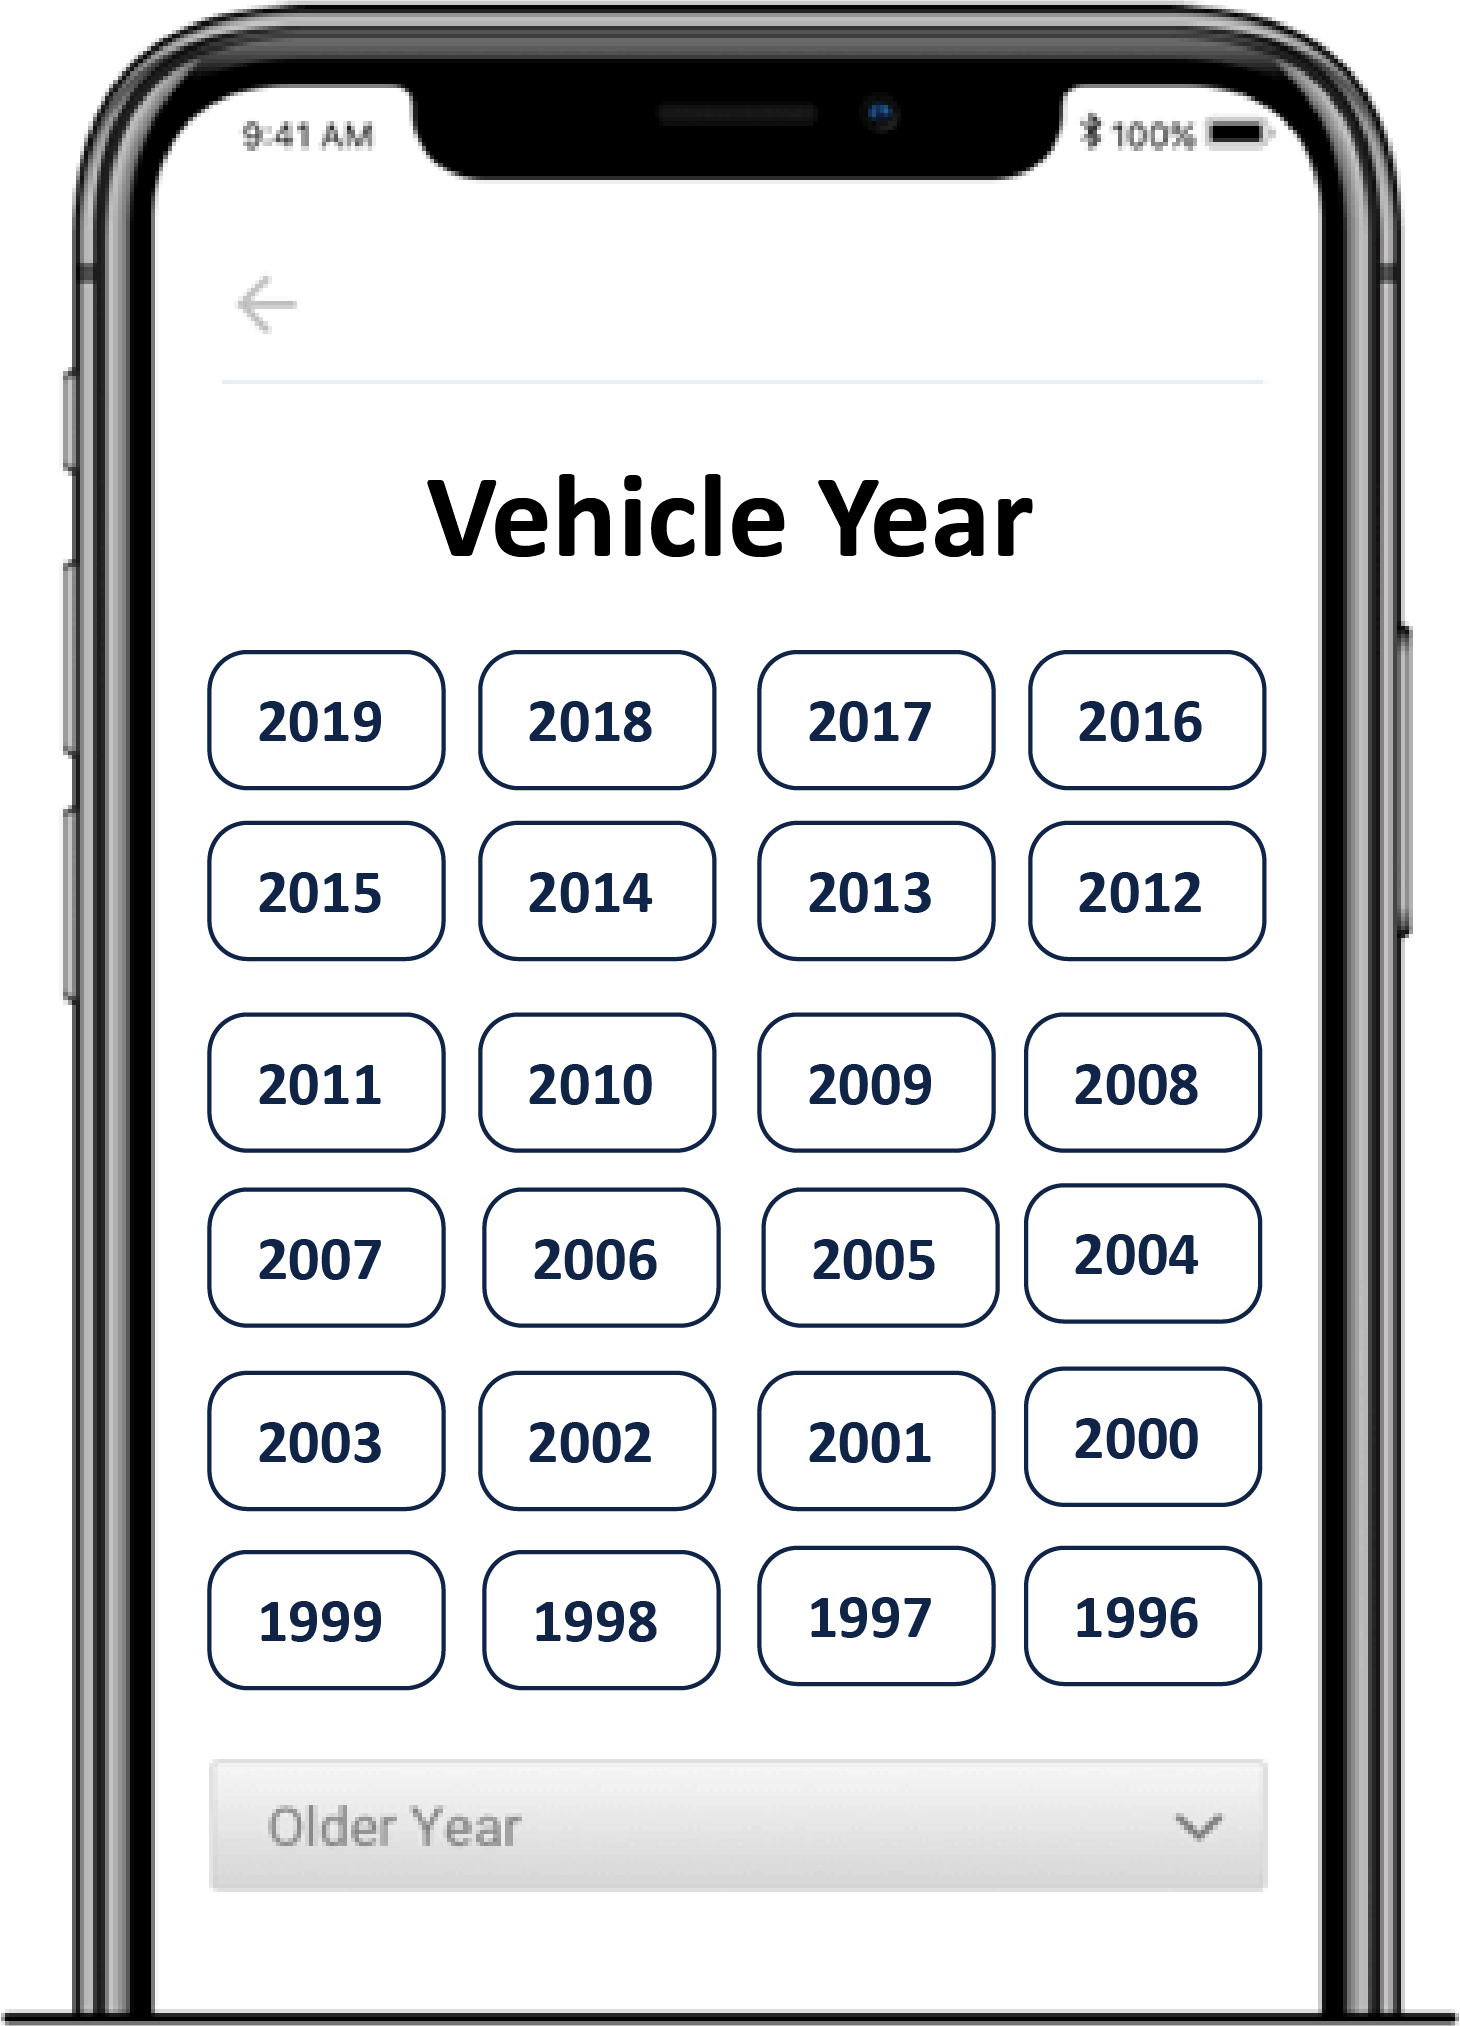 A phone screen showing options select years from 1996 to 2019